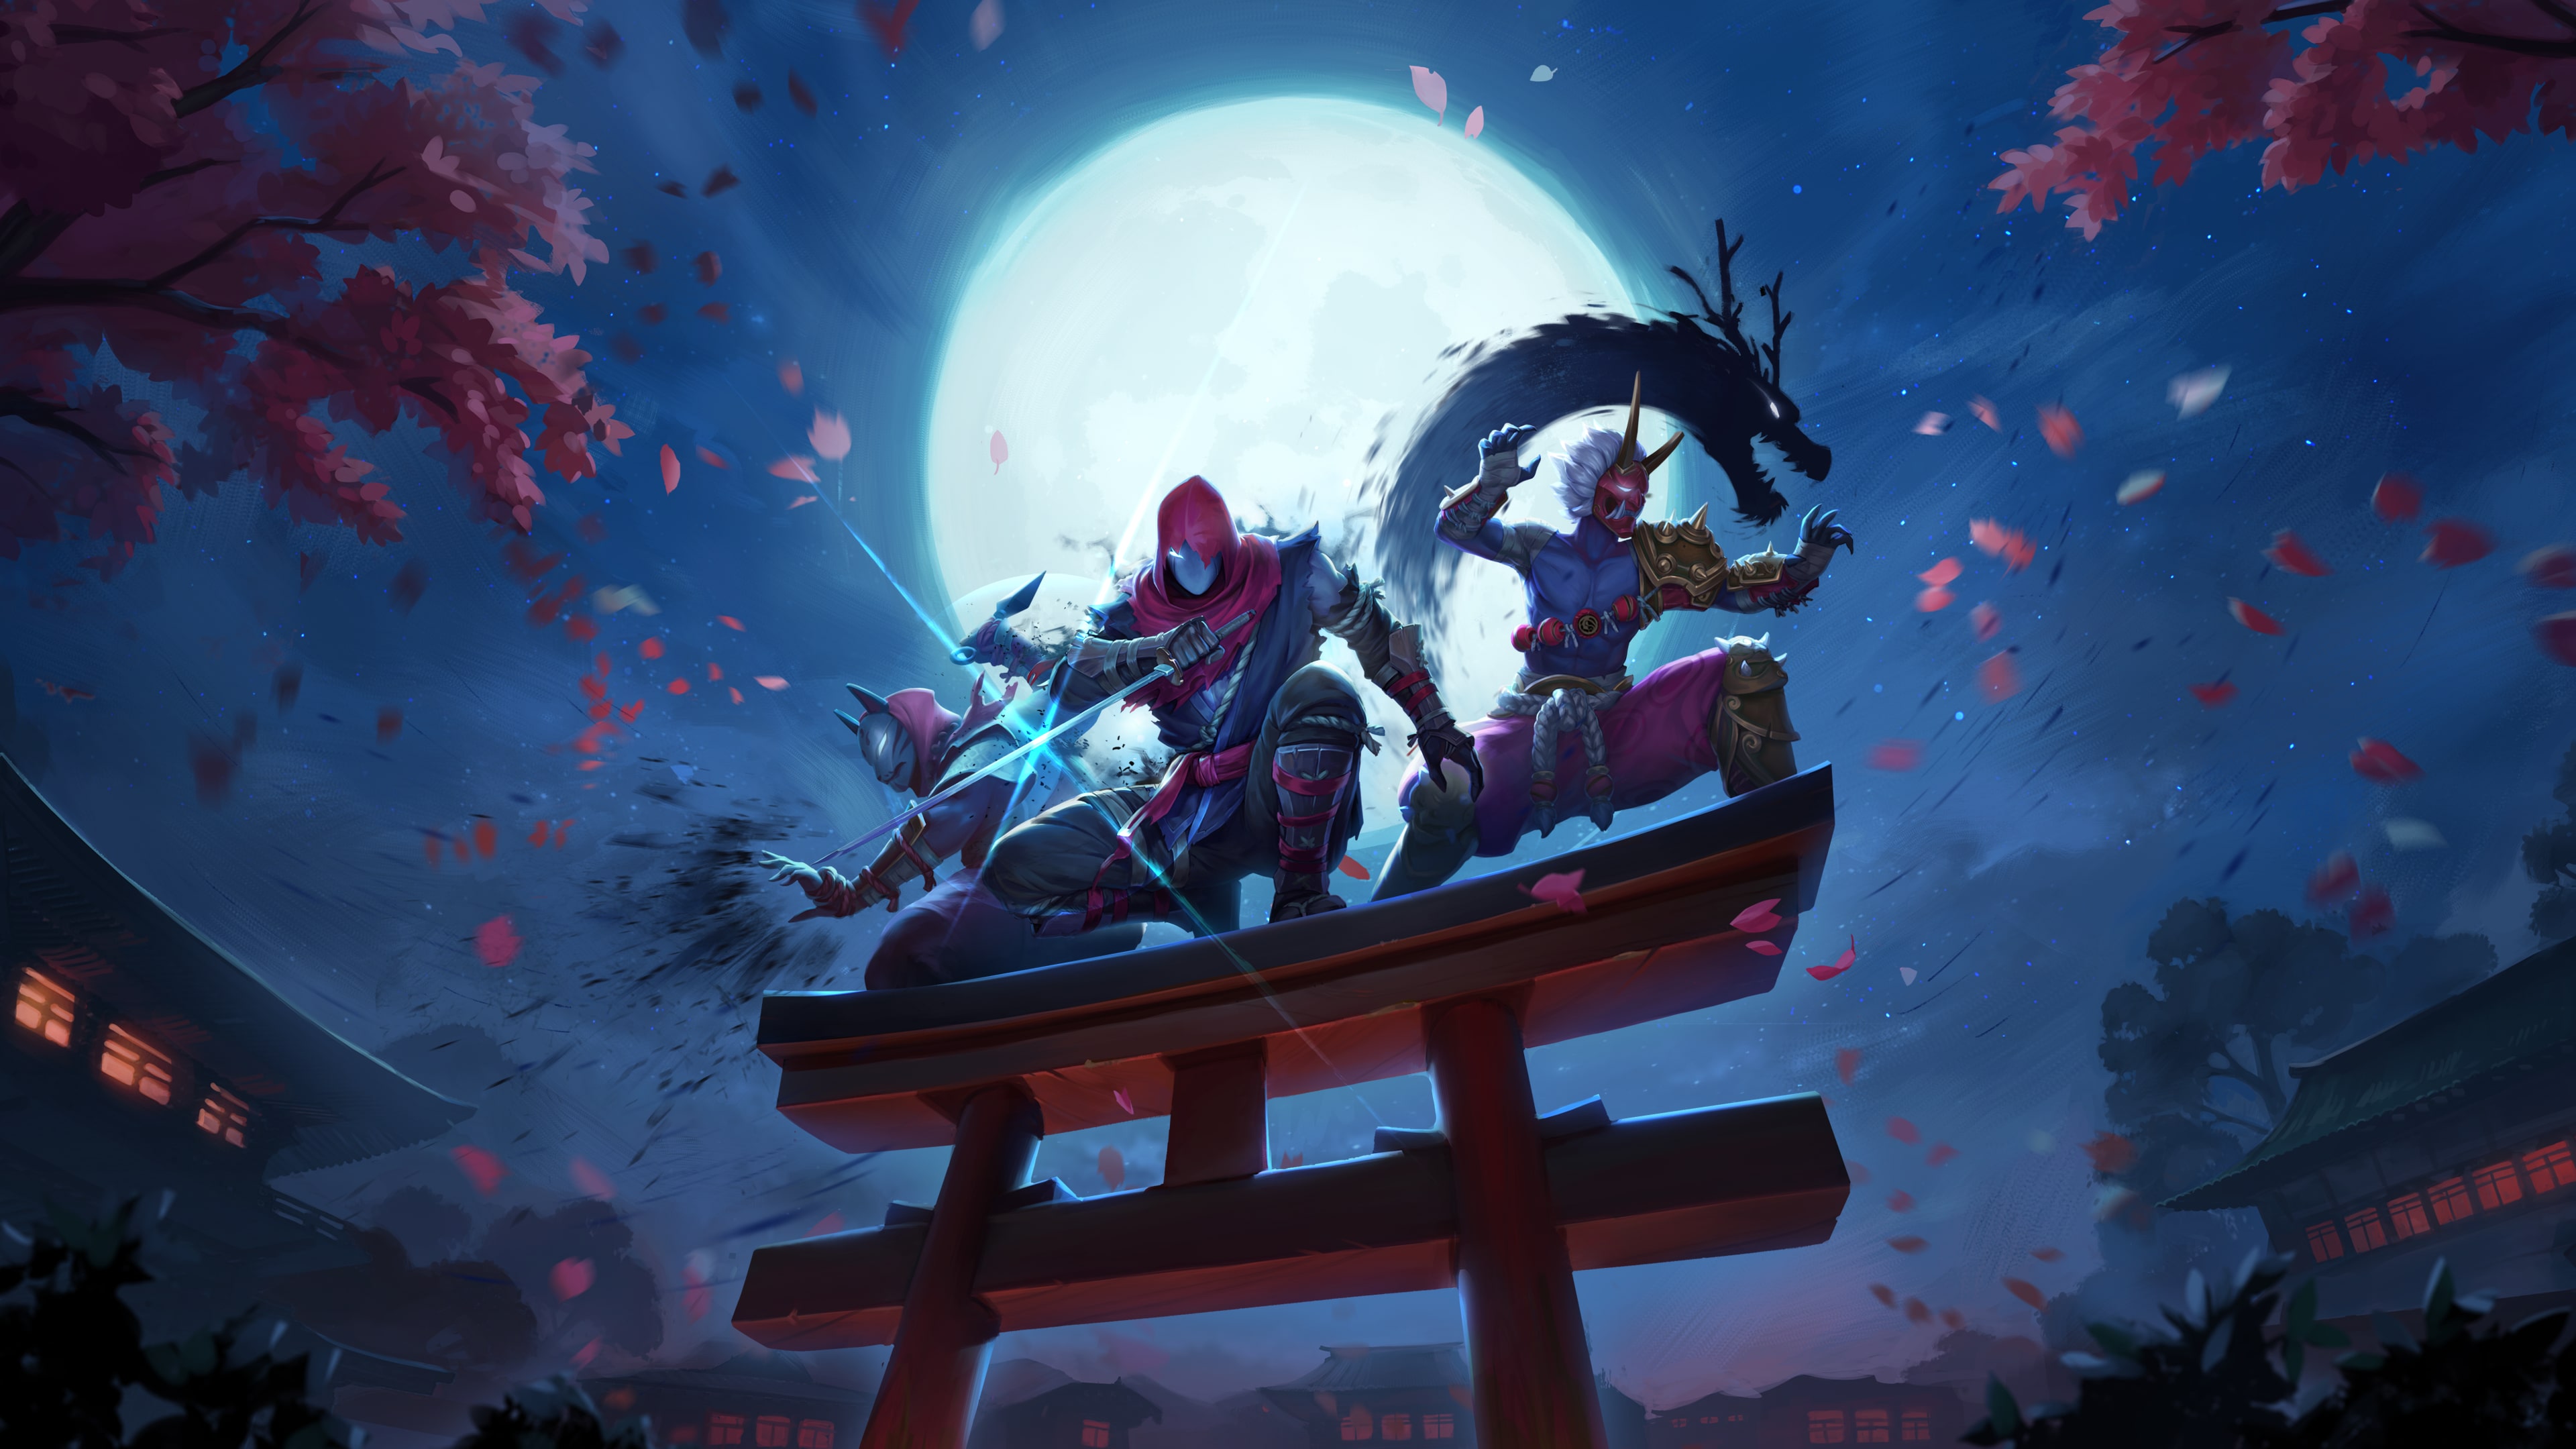 Aragami 2 (Simplified Chinese, English, Korean, Traditional Chinese)